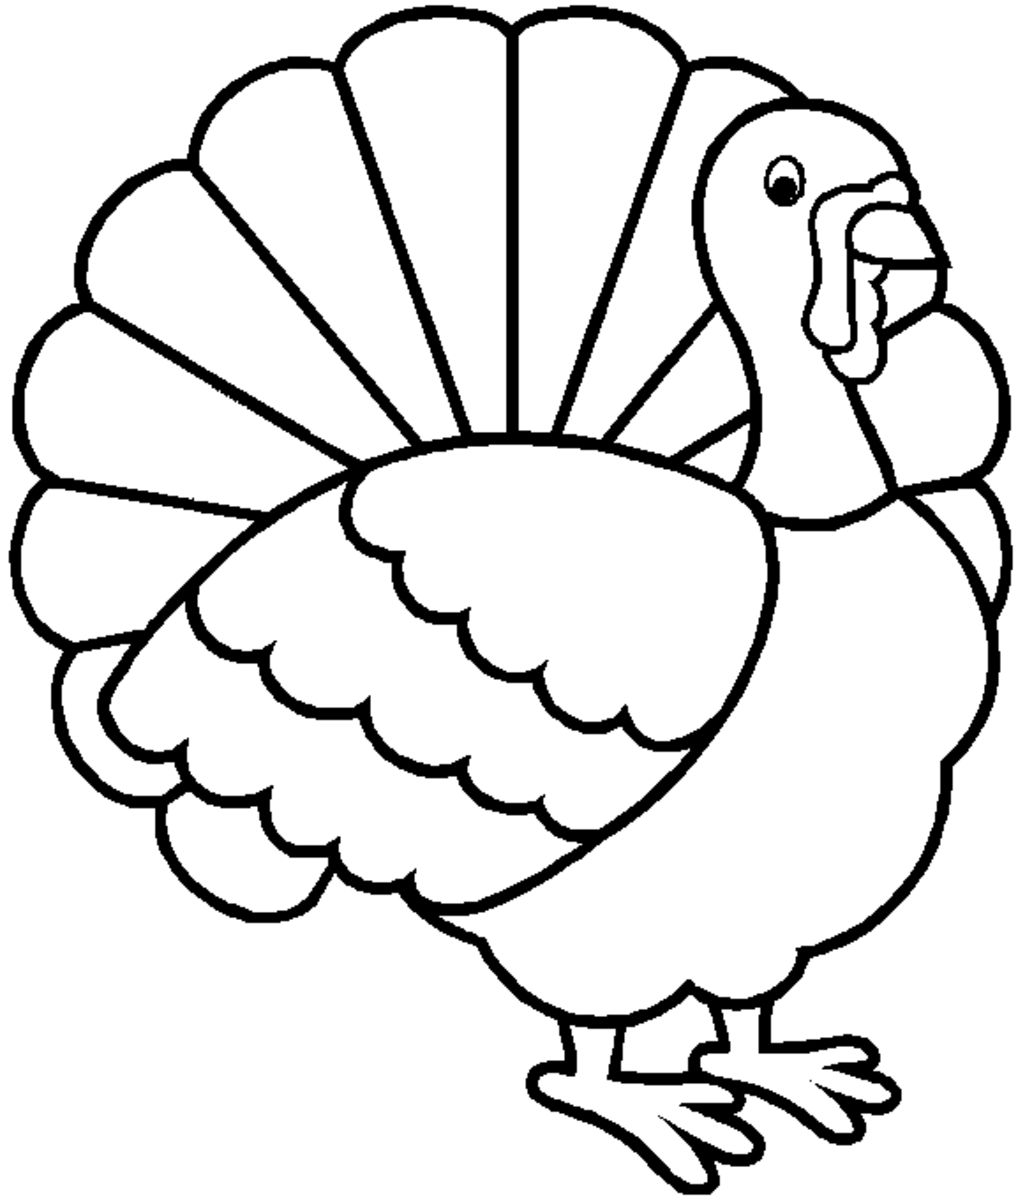 free-thanksgiving-coloring-pages-for-kids